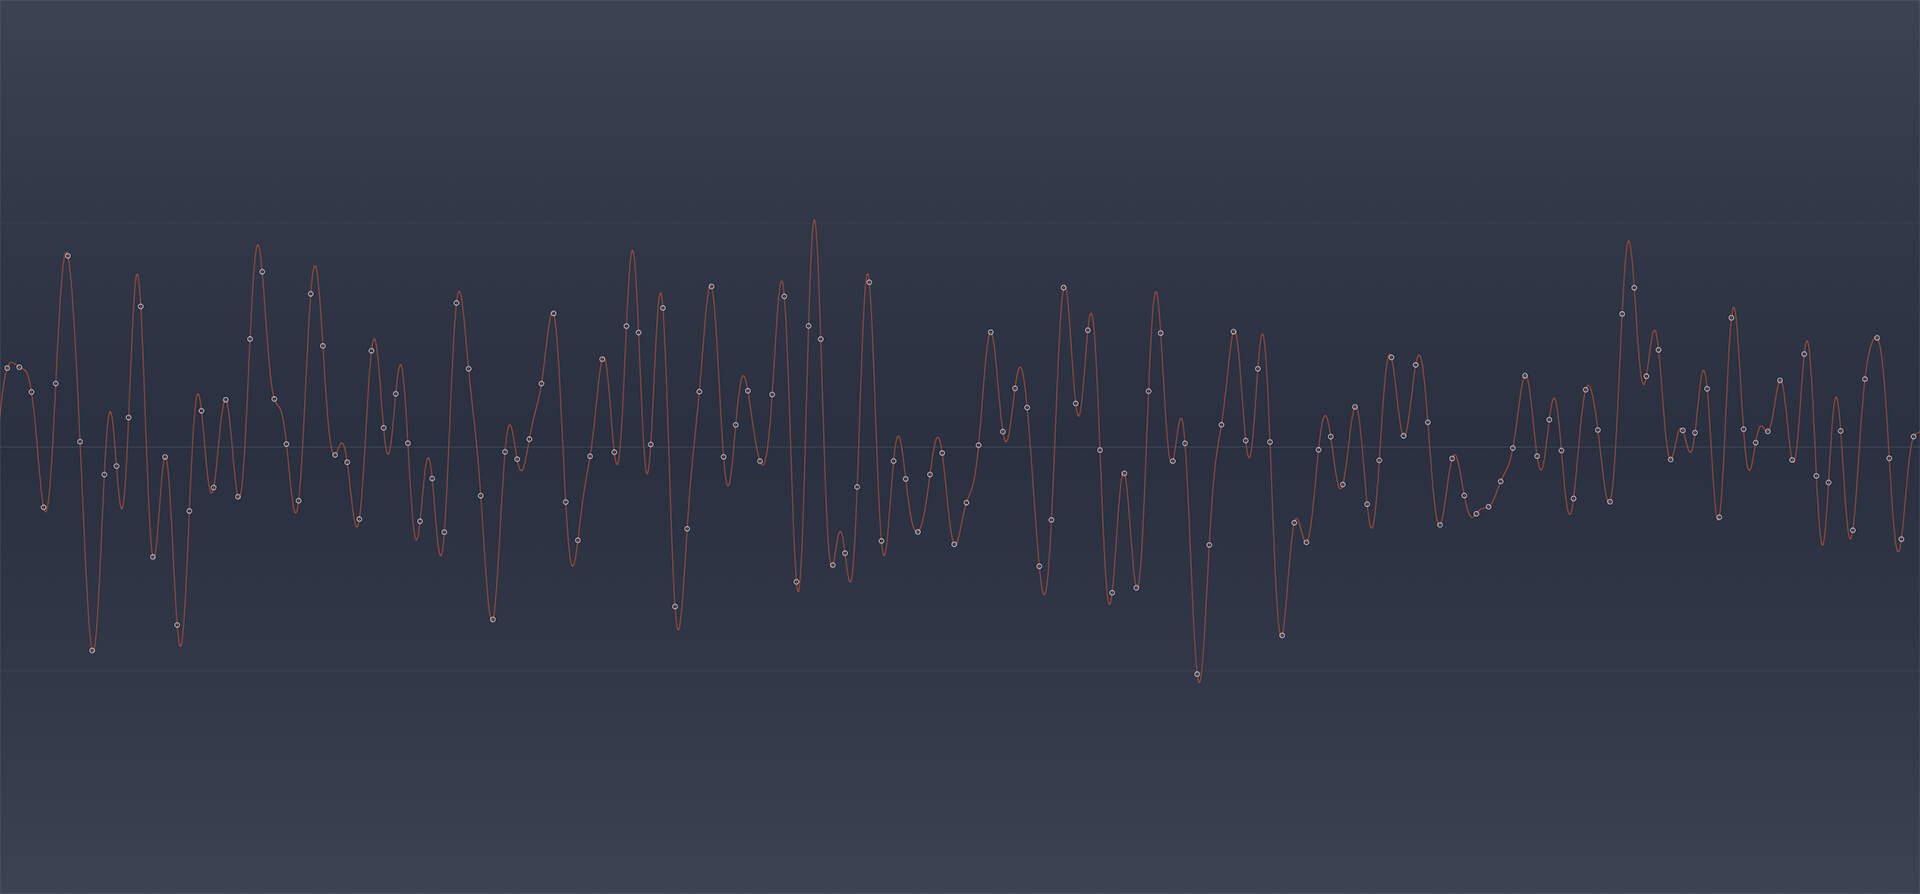 A waveform of a sound signal over time with various points marked where the peak at each sample is located.